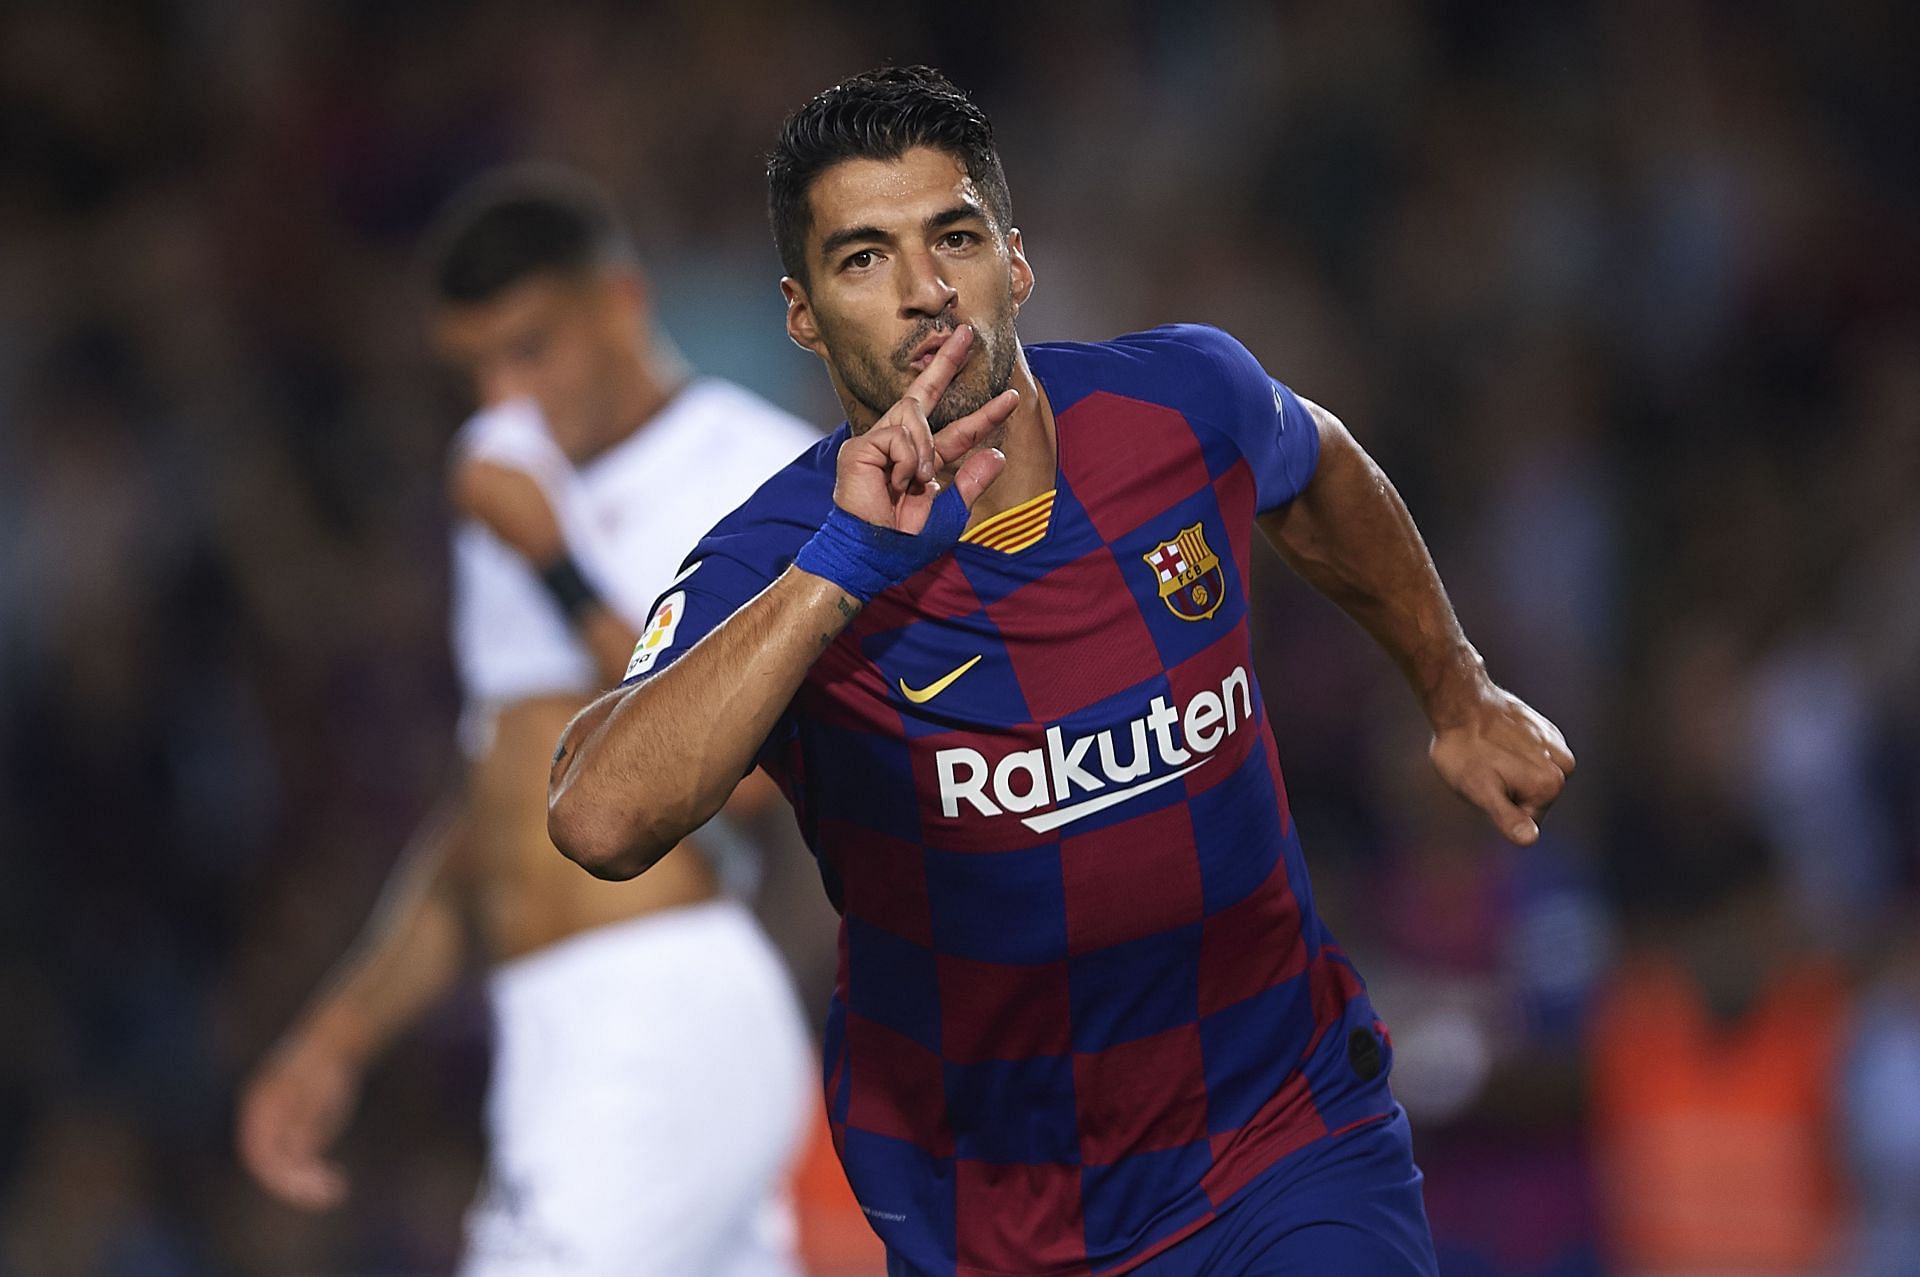 Luis Suarez has won the league with two different Spanish clubs